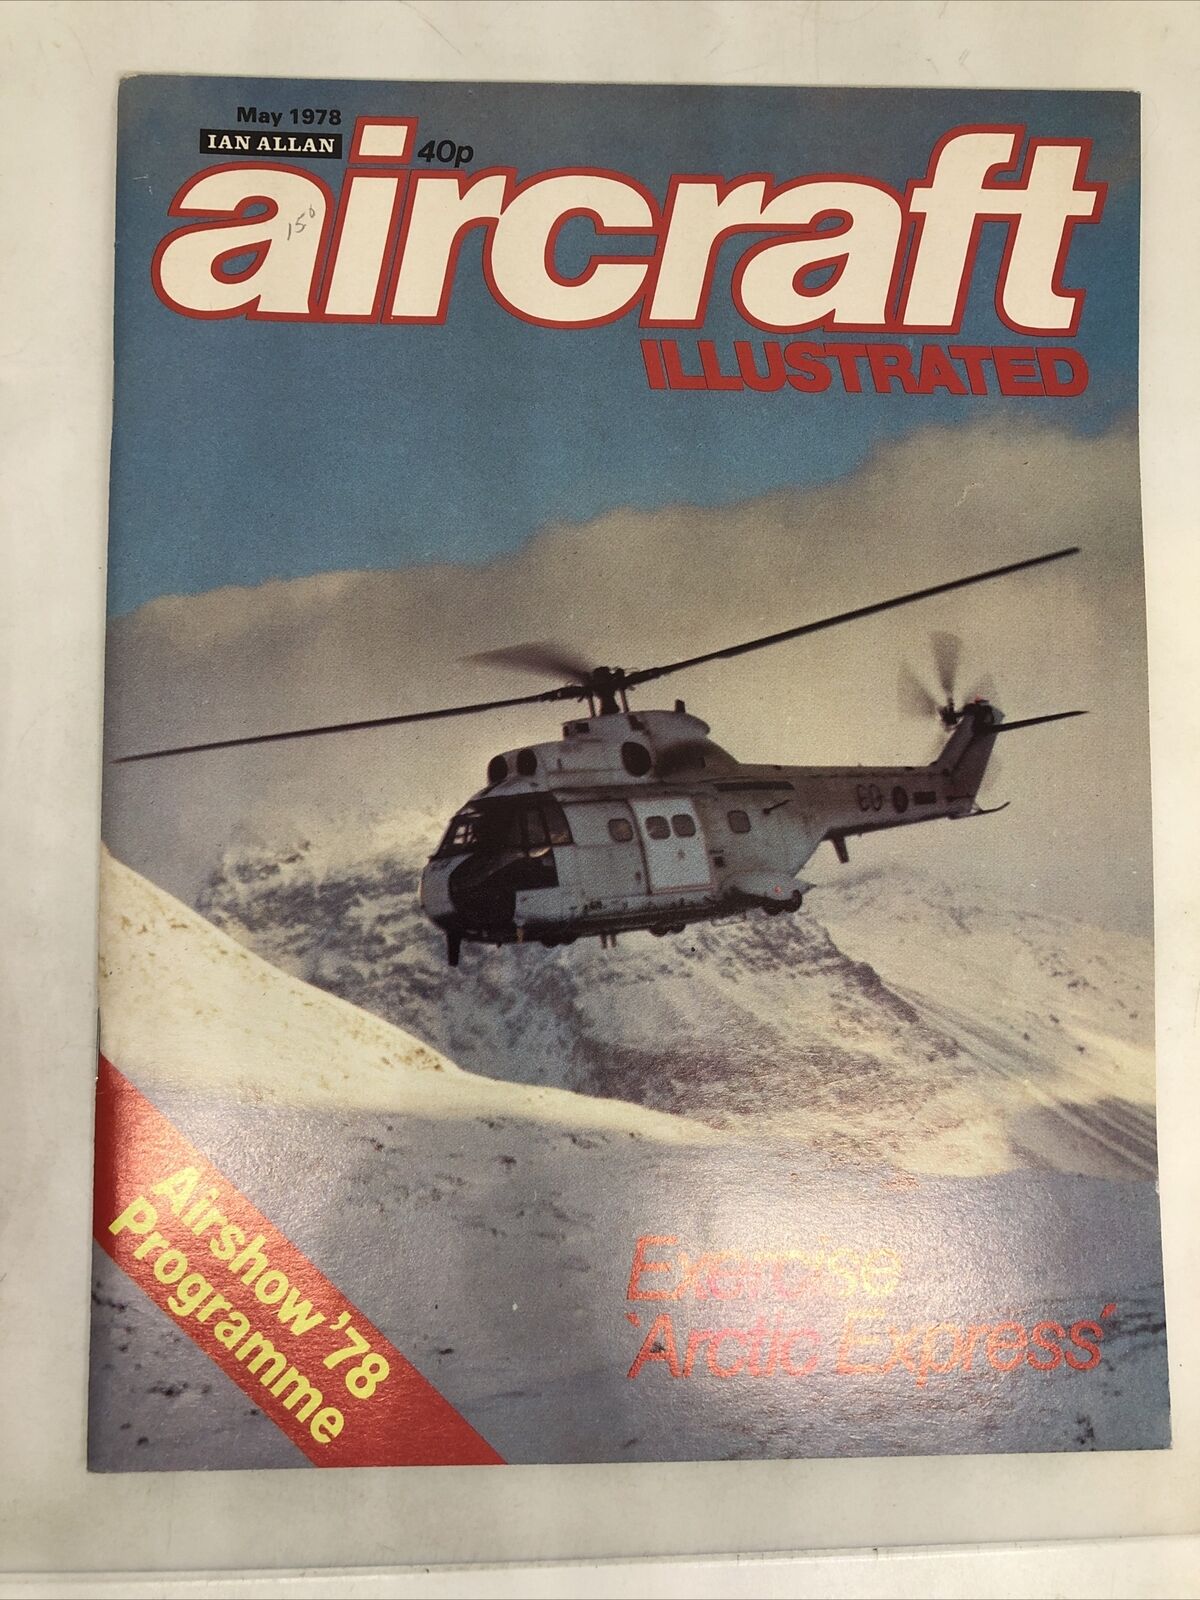 AIRCRAFT ILLUSTRATED Magazine MAY 1978 IAN ALLAN aviation airlines airways ad